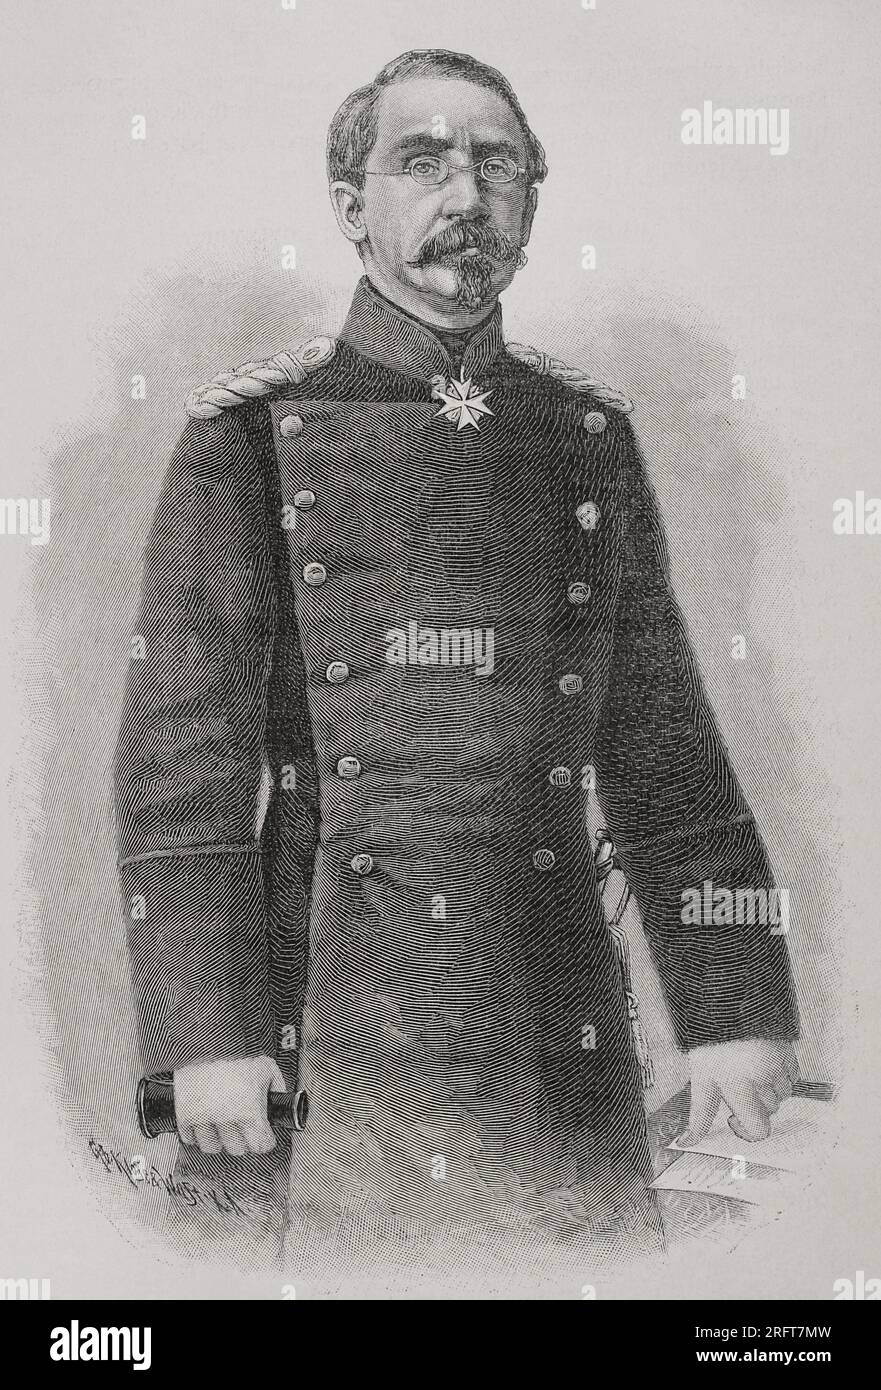 August Karl von Goeben (1816-1880). Prussian general. He was awarded the Grand Cross of the Iron Cross in 1870 for his service in the Franco-Prussian War. Portrait. Engraving. 'Historia de la Guerra Franco-Alemana de 1870-1871'. Published in Barcelona, 1891. Stock Photo